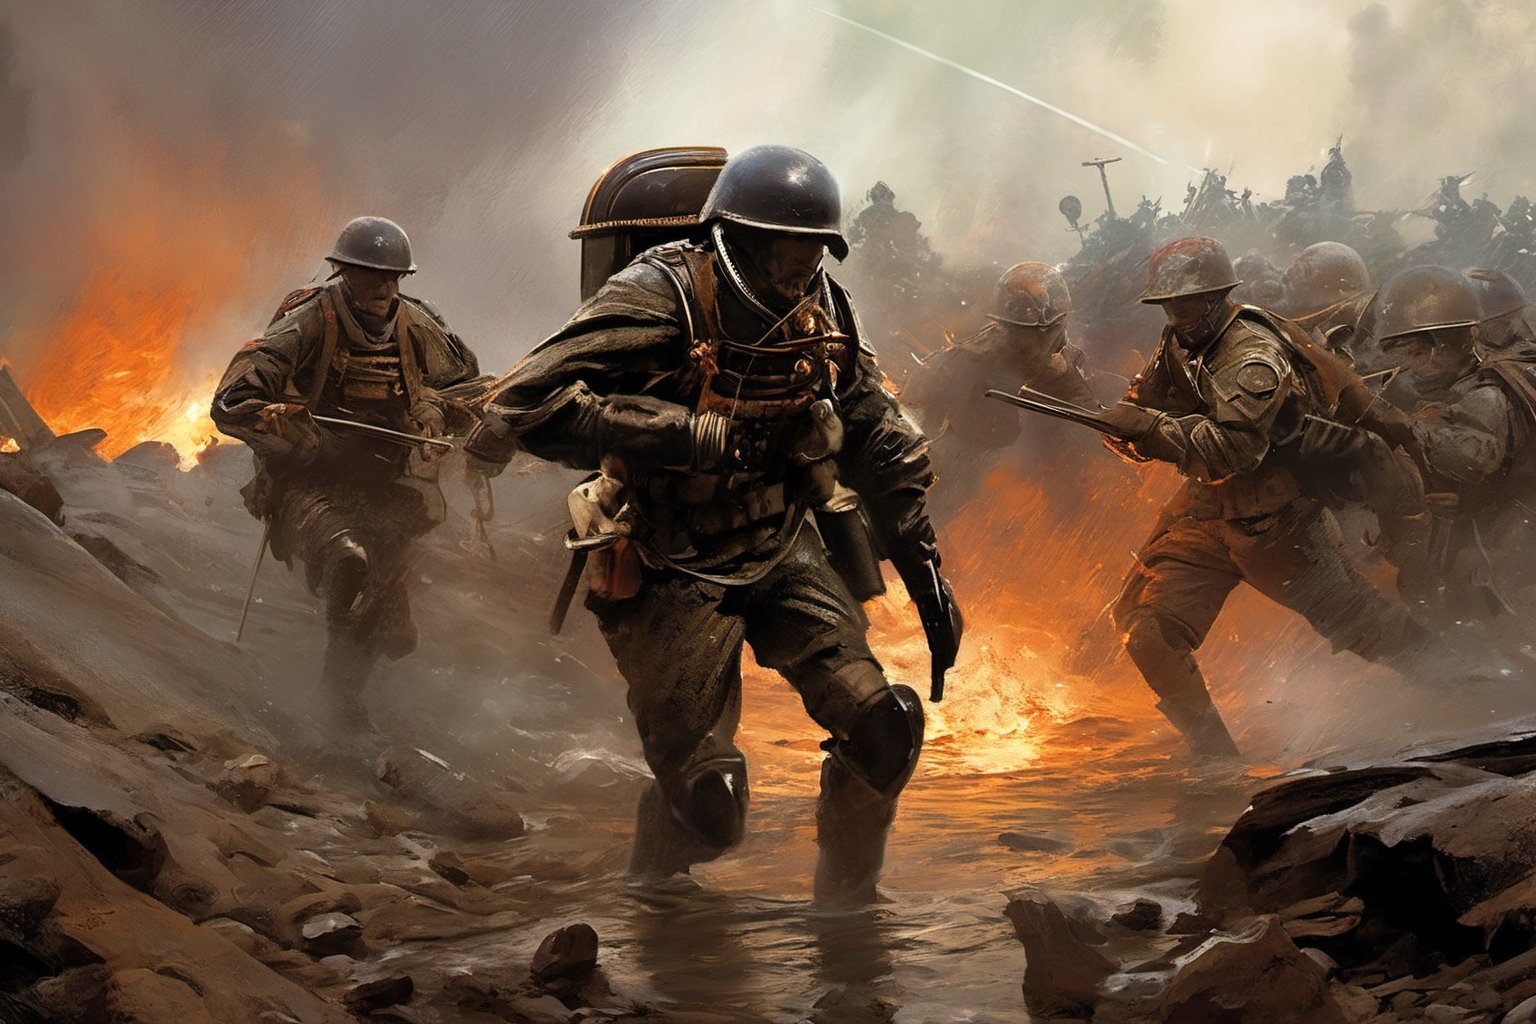 War Cinematic, soldiers wearing exoskeleton armor,dramatic,explosion from artillery, detail,complex_background,beautiful,greg rutkowski,german style armor,chaos,worls war 2 steam punk style, foggy,many soldiers,extremely dangerous, extremely detail ,art by sargent,amputated, bloody puddle, battle_stance, trench attack